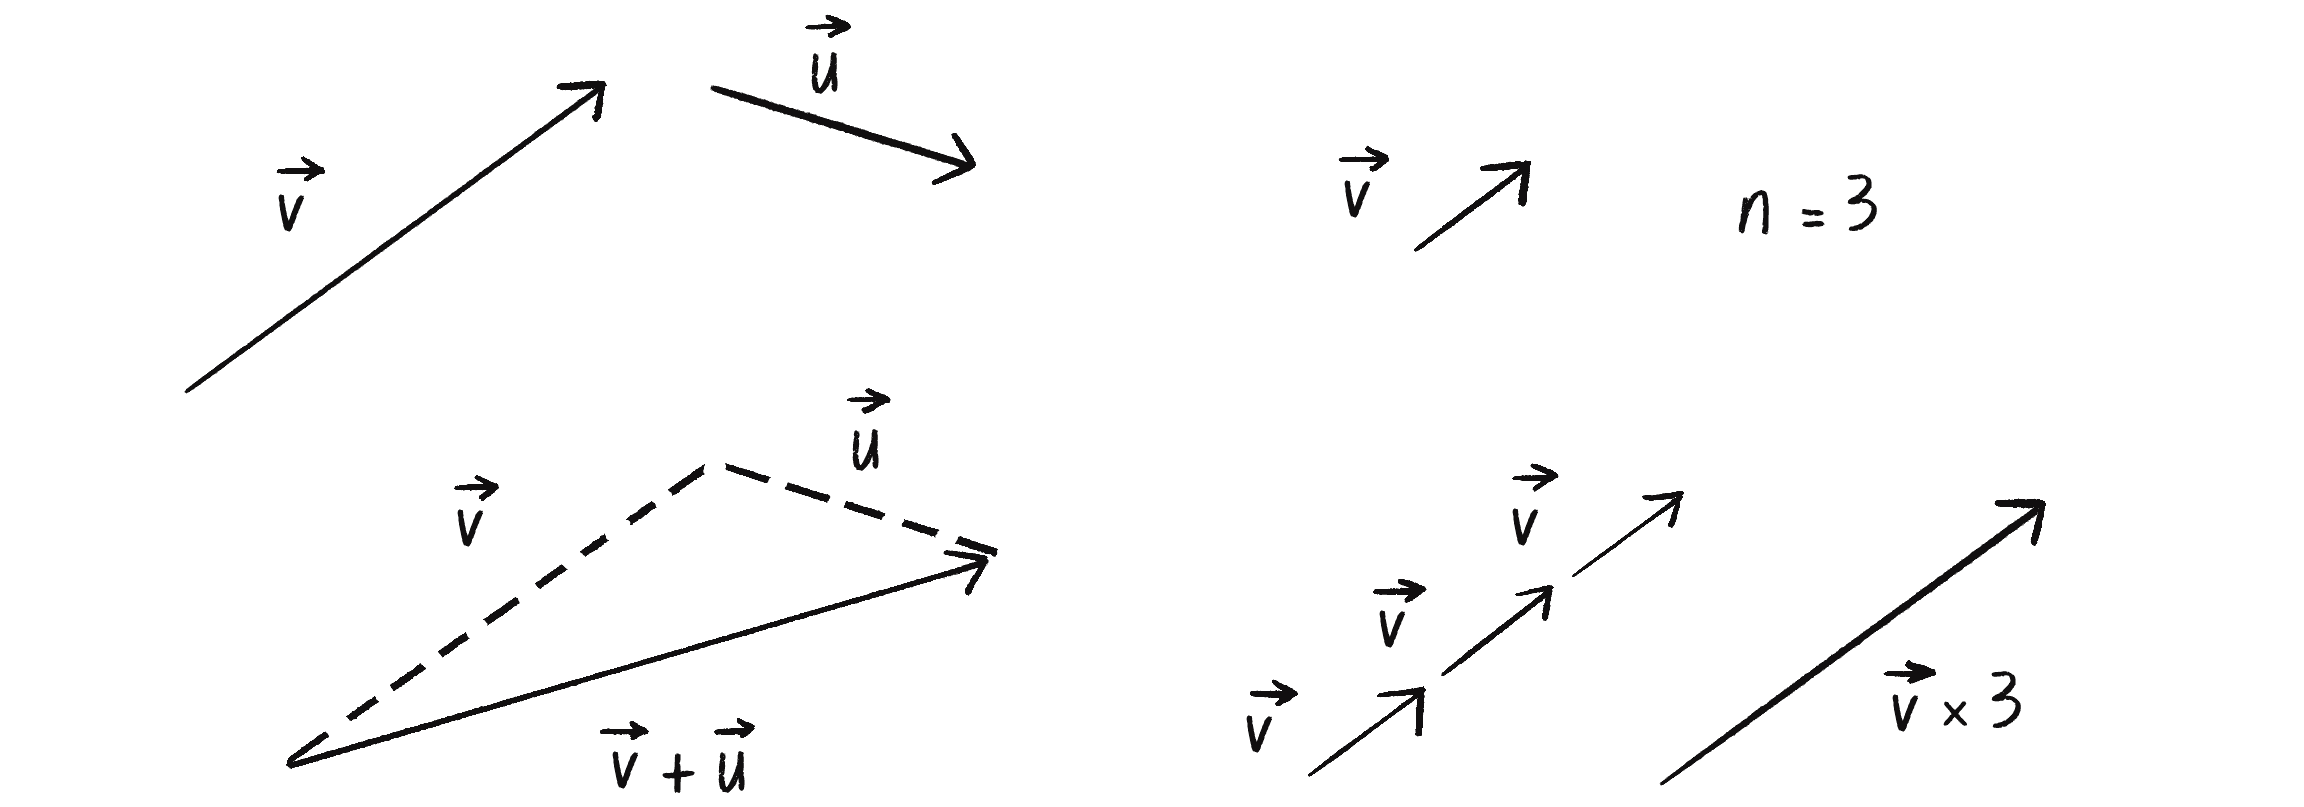 Figure 5.17: Adding vectors and multiplying a vector by a scalar